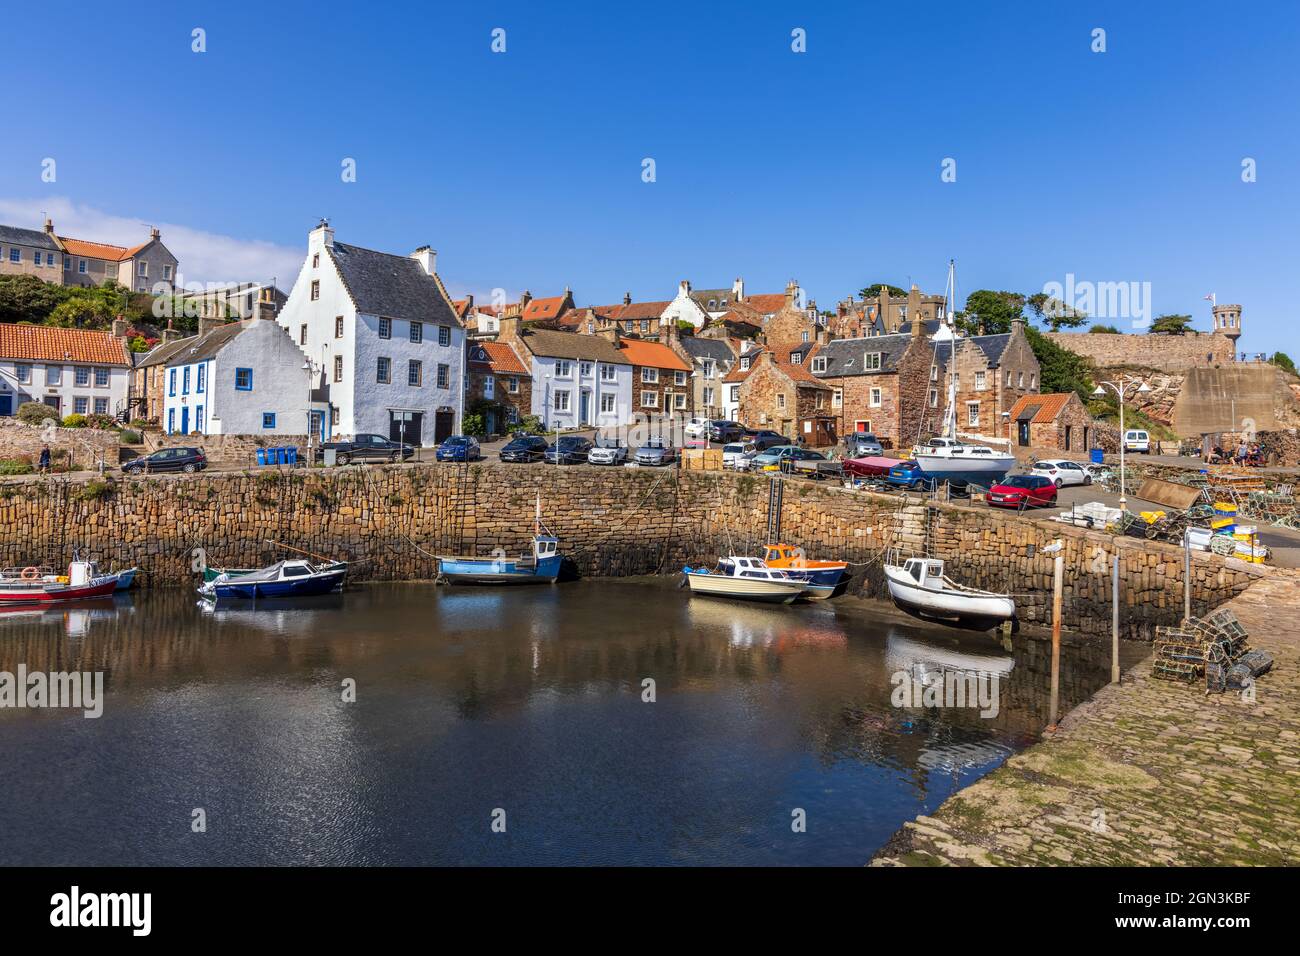 The historic fishing village of Crail, with its picturesque harbour and colourful fishing boats, on the east coast of Fife, Scotland. Stock Photo